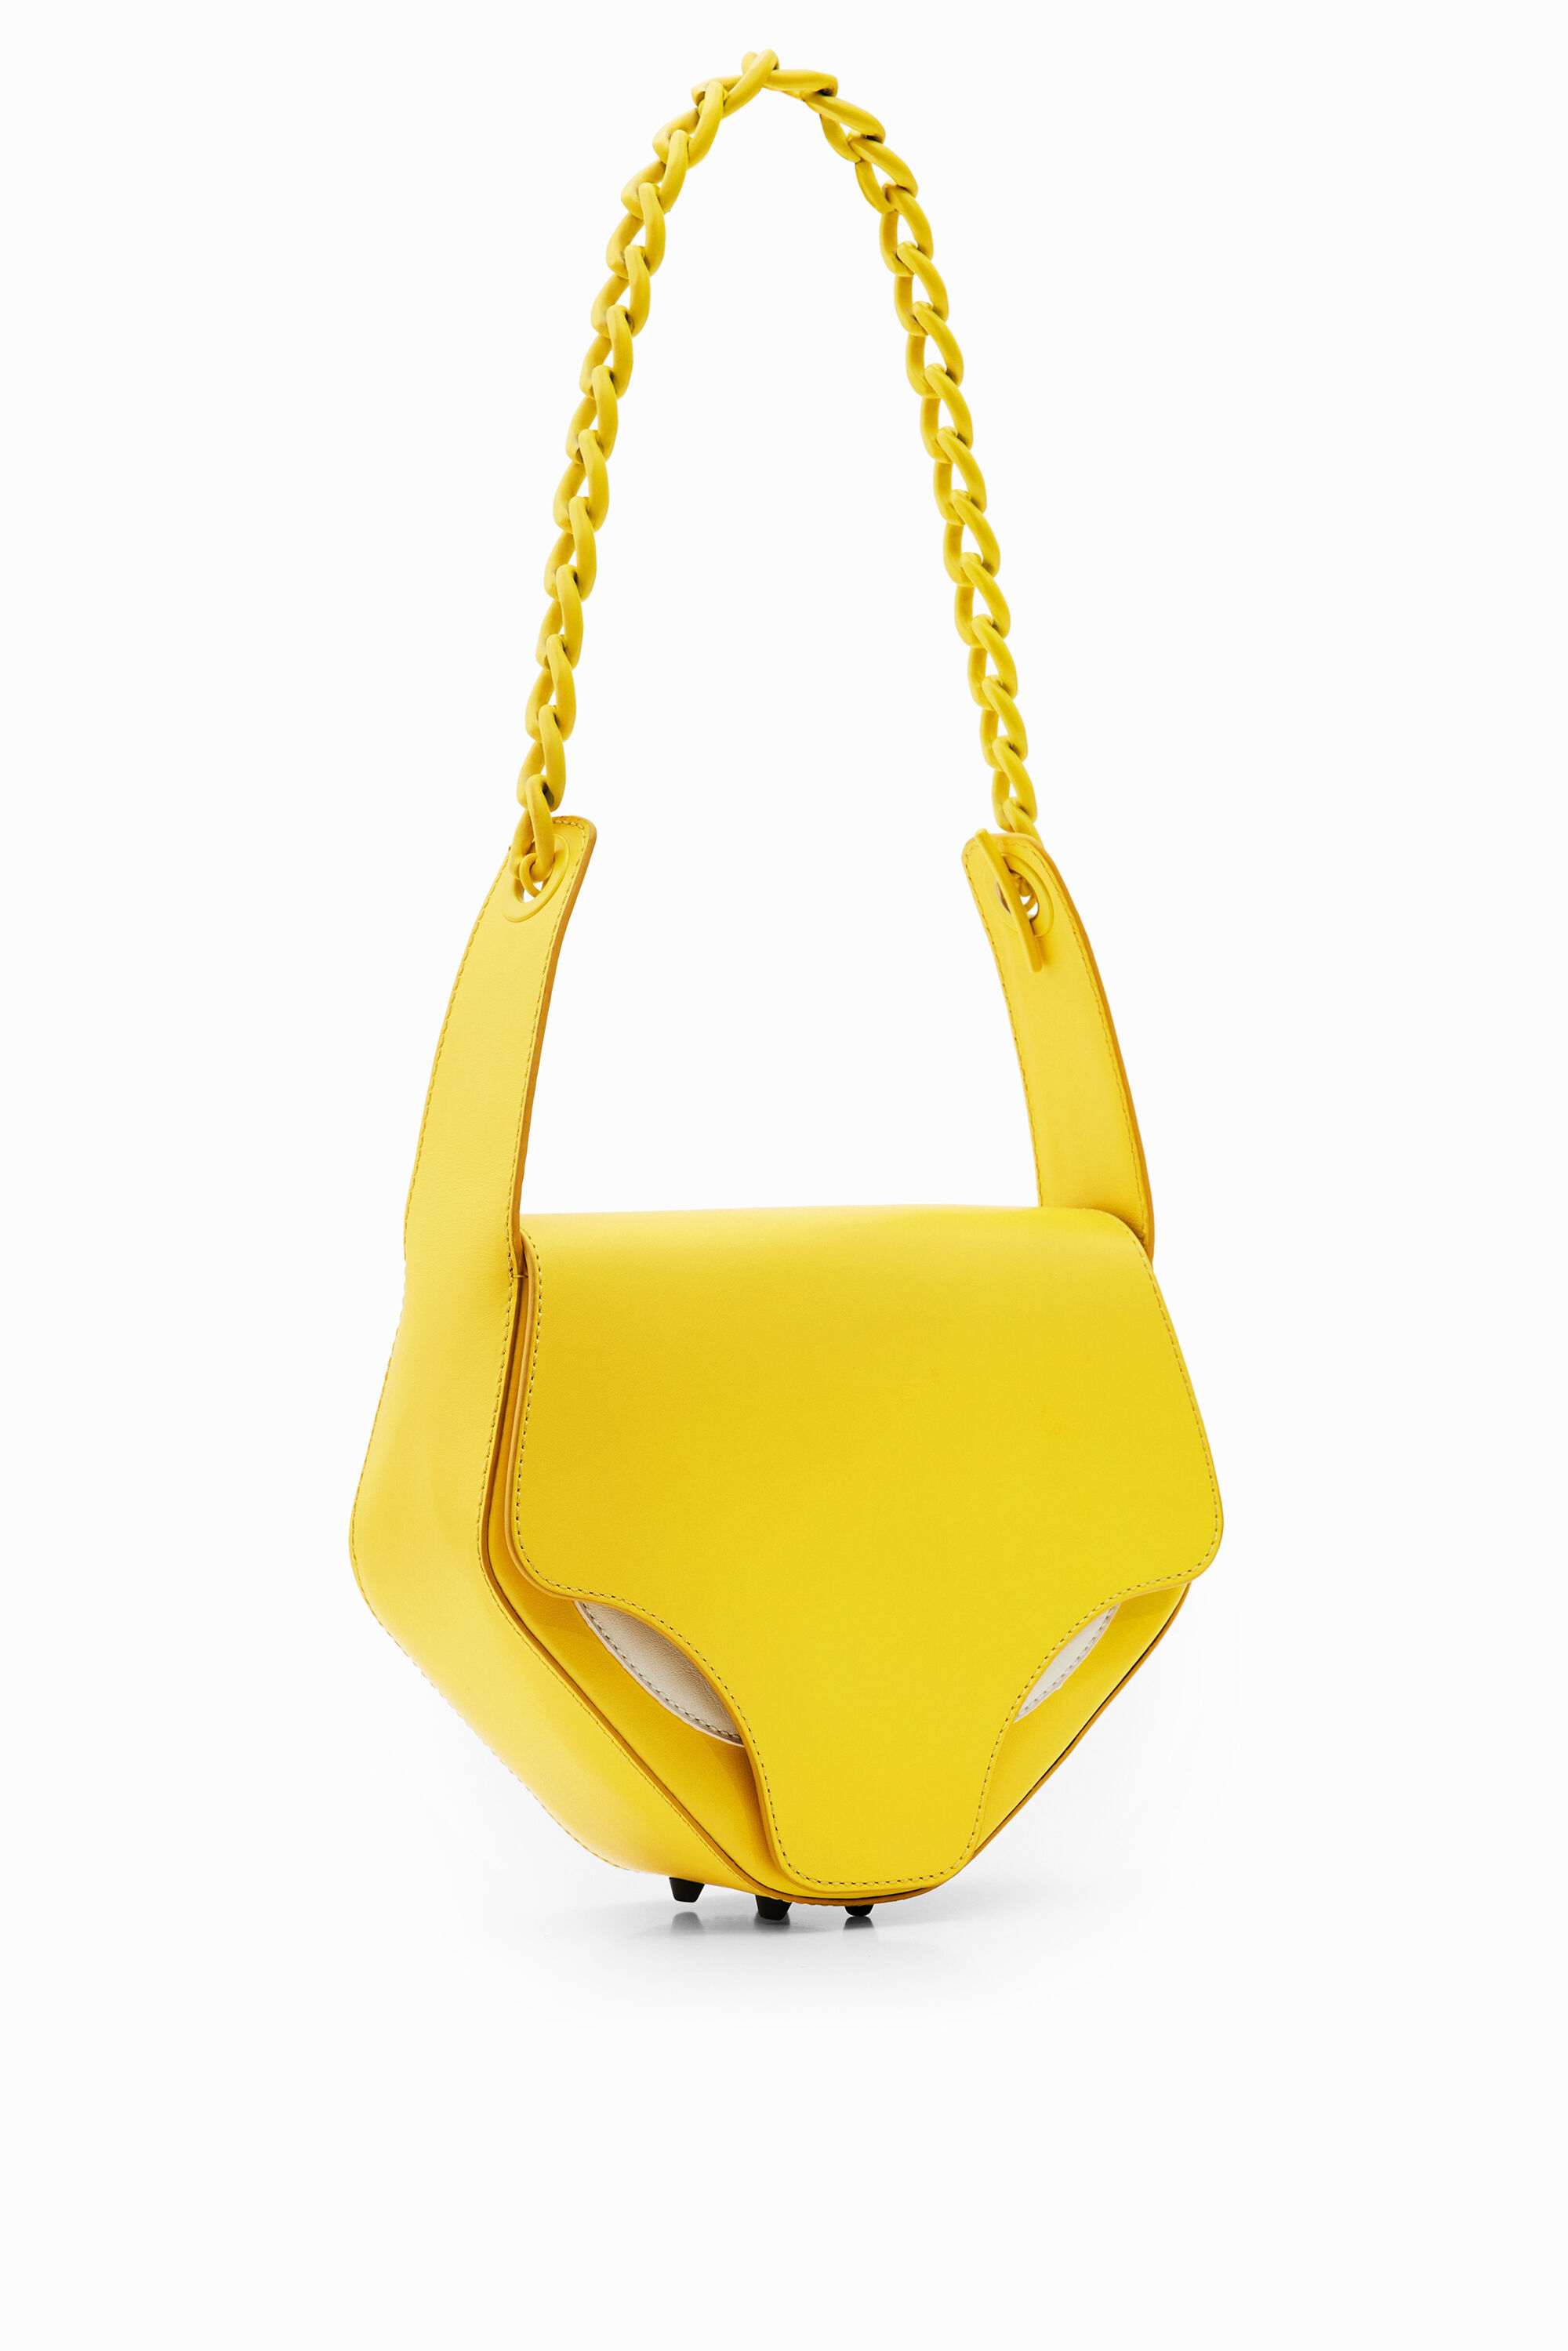 Desigual Maitrepierre Leather Bag In Yellow